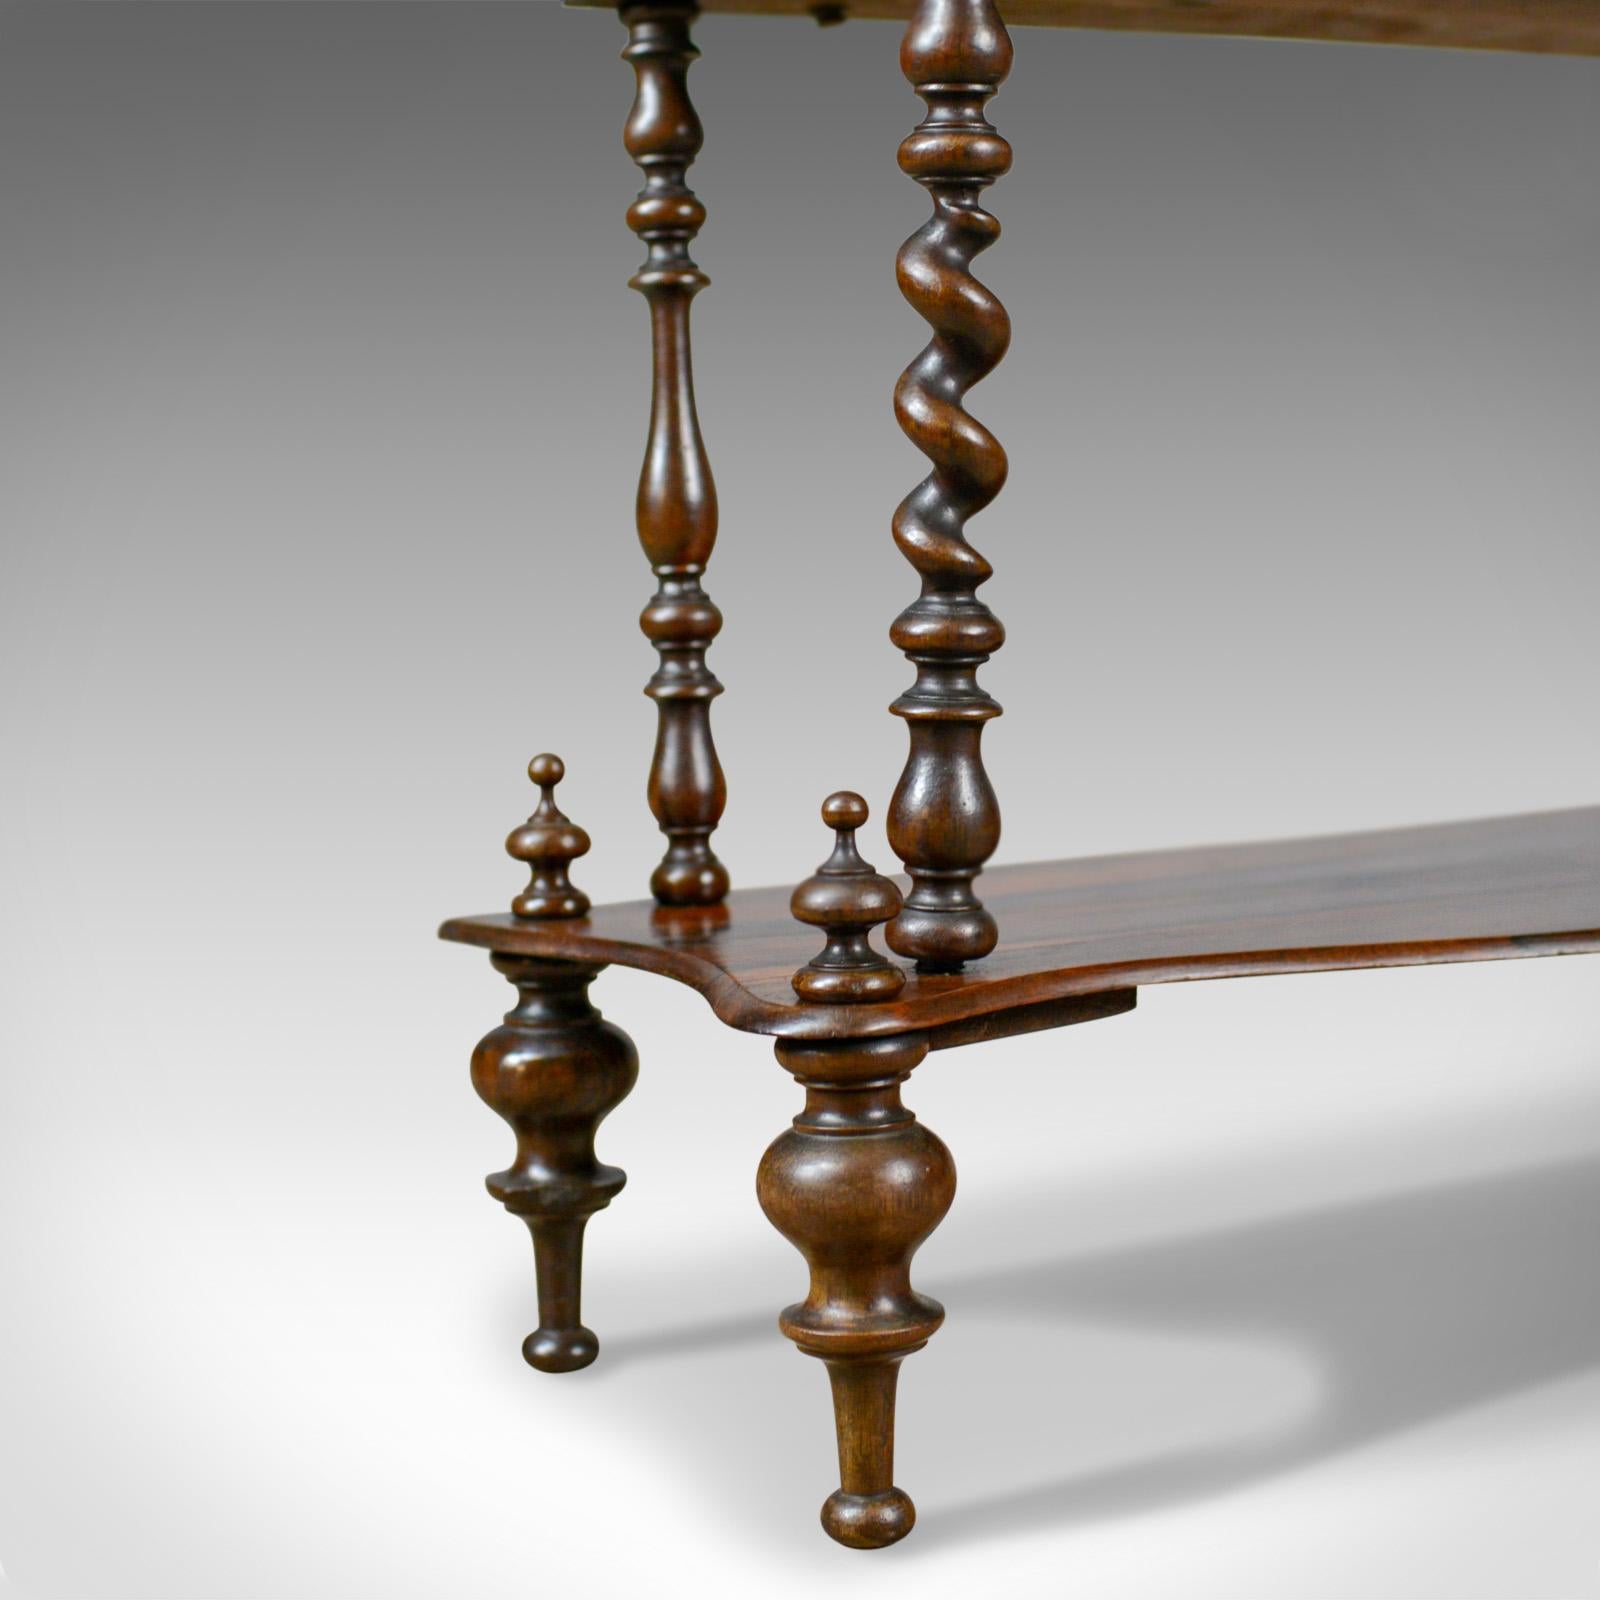 Rosewood Antique English Whatnot, Regency, Three-Tier Display Stand, circa 1820